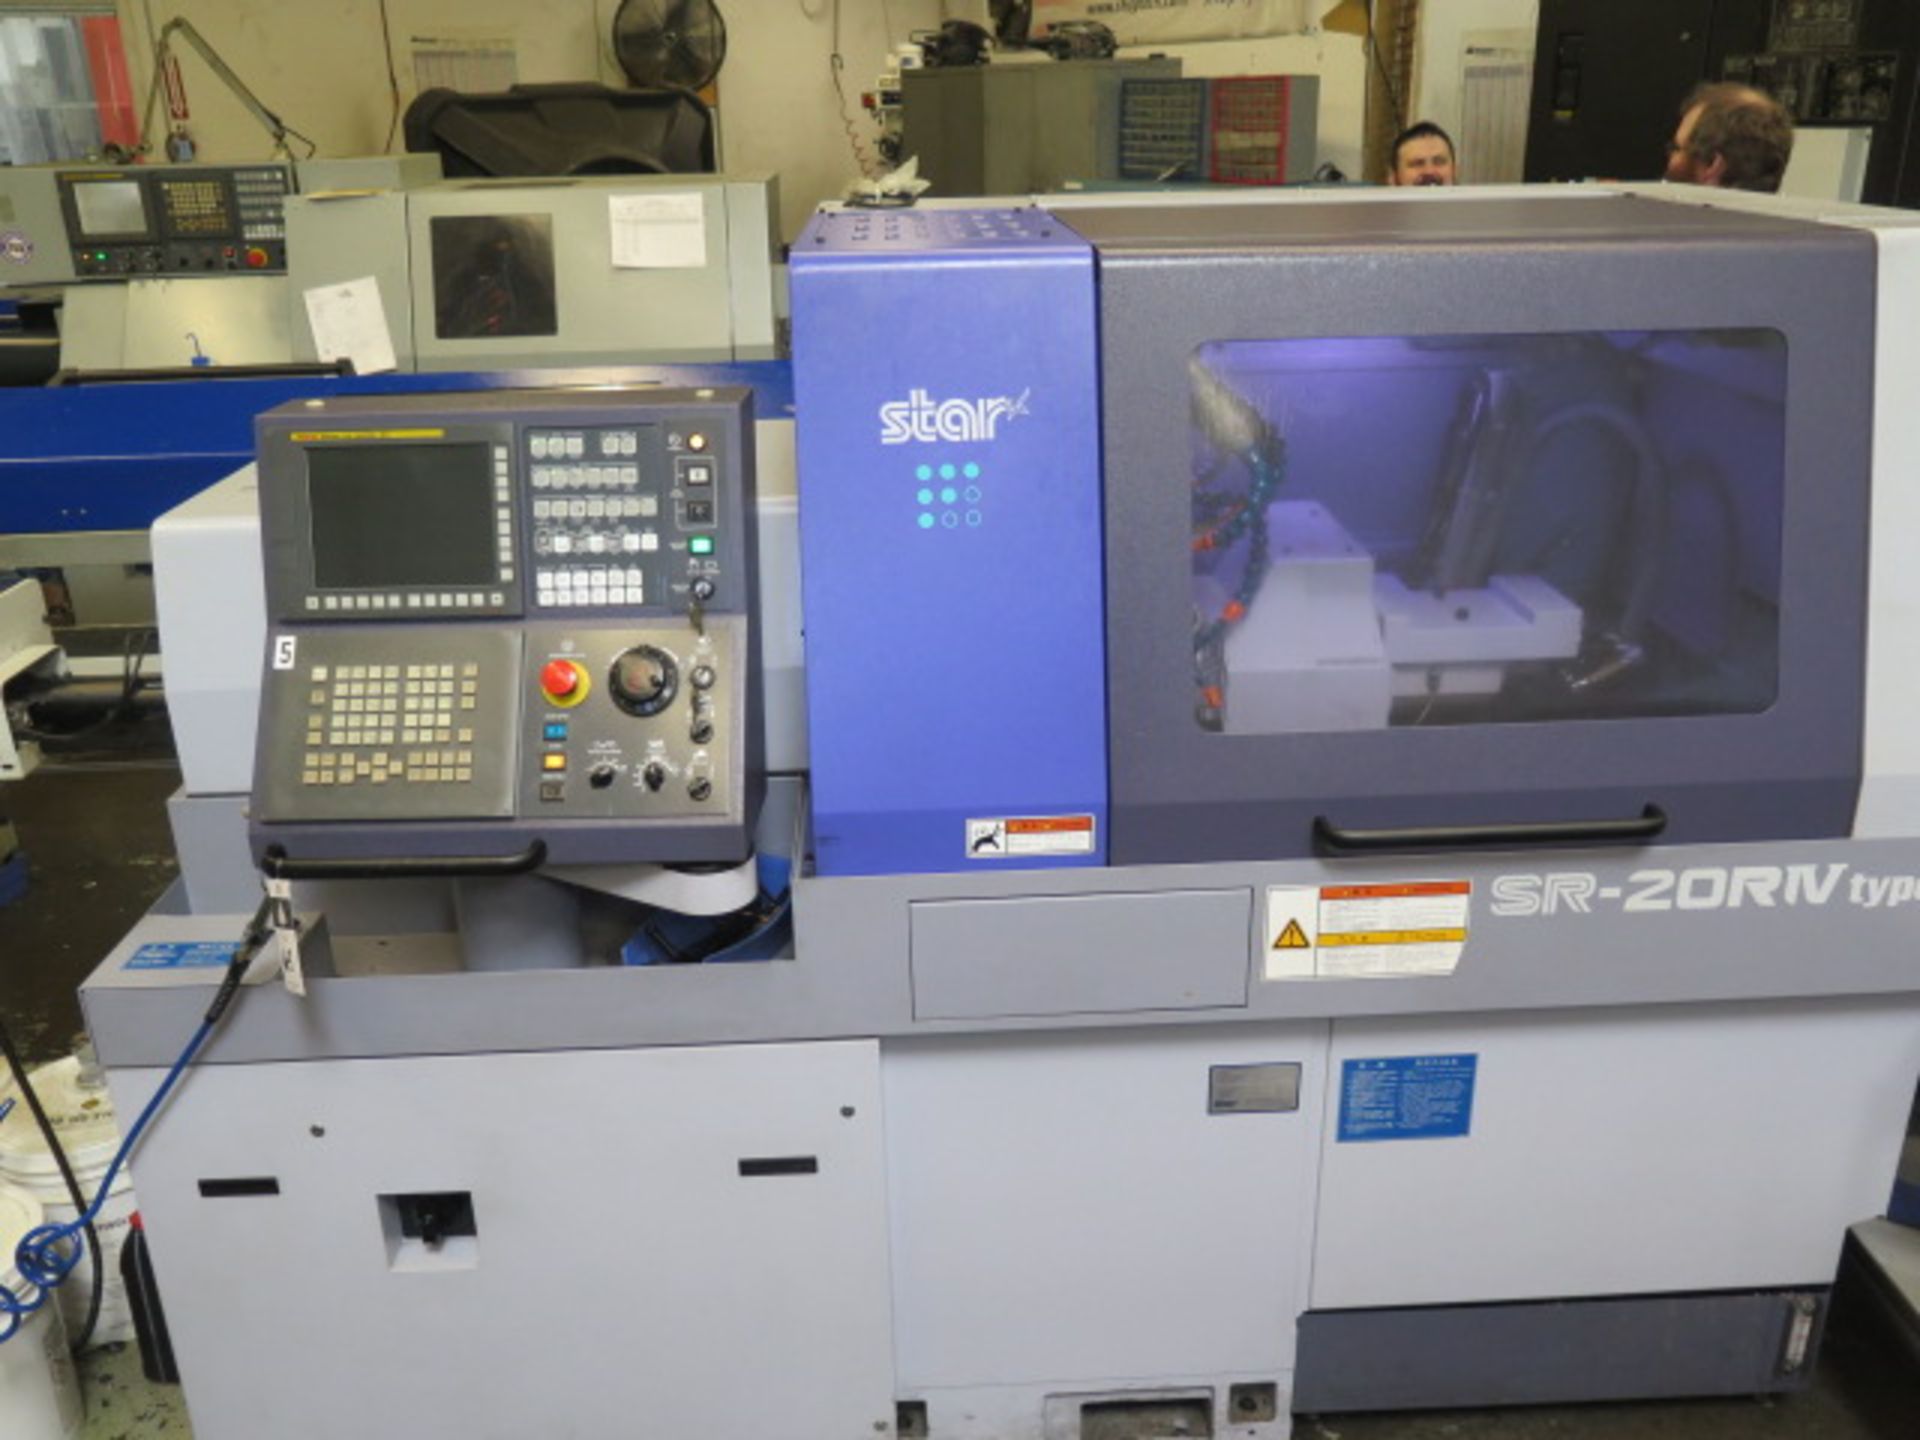 2018 Star SR-20R IV Type B 20mm CNC Screw Machine s/n 0609(056) w/ Fanuc 31i-Model B5, SOLD AS IS - Image 4 of 16